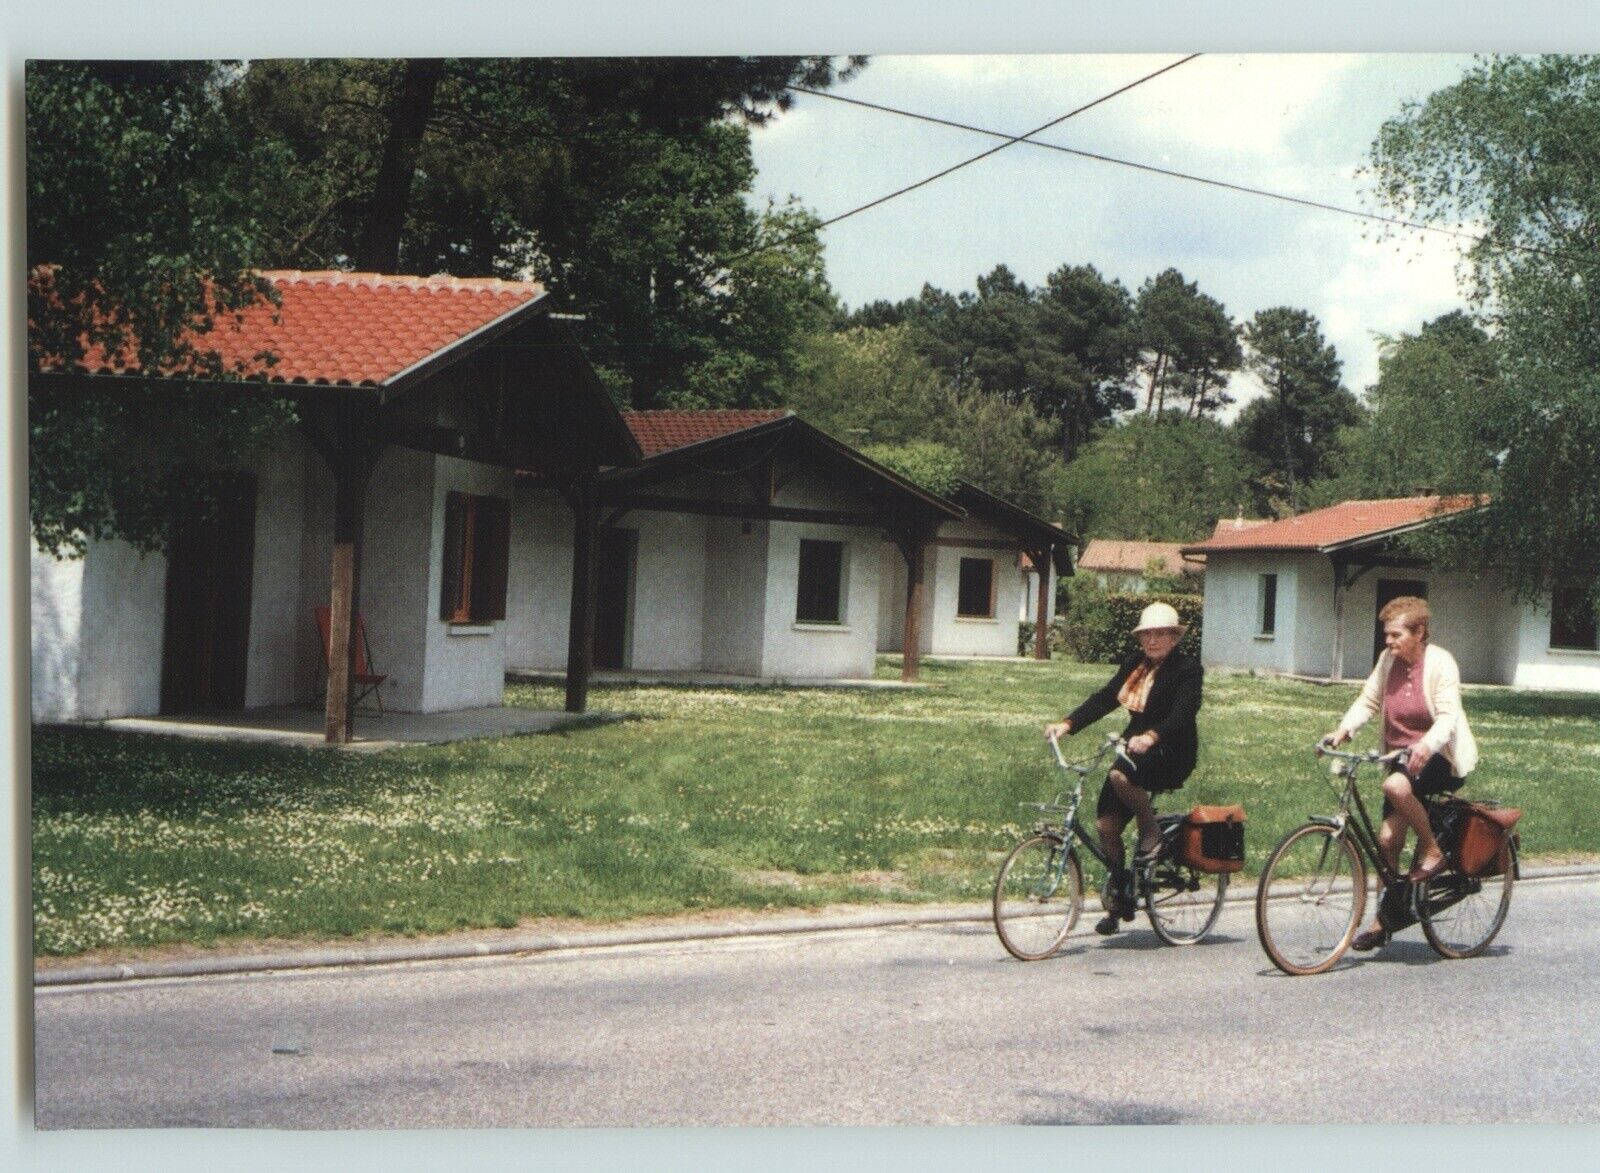 Postcard: Elderly Women on Bicycles - Houeilles, France